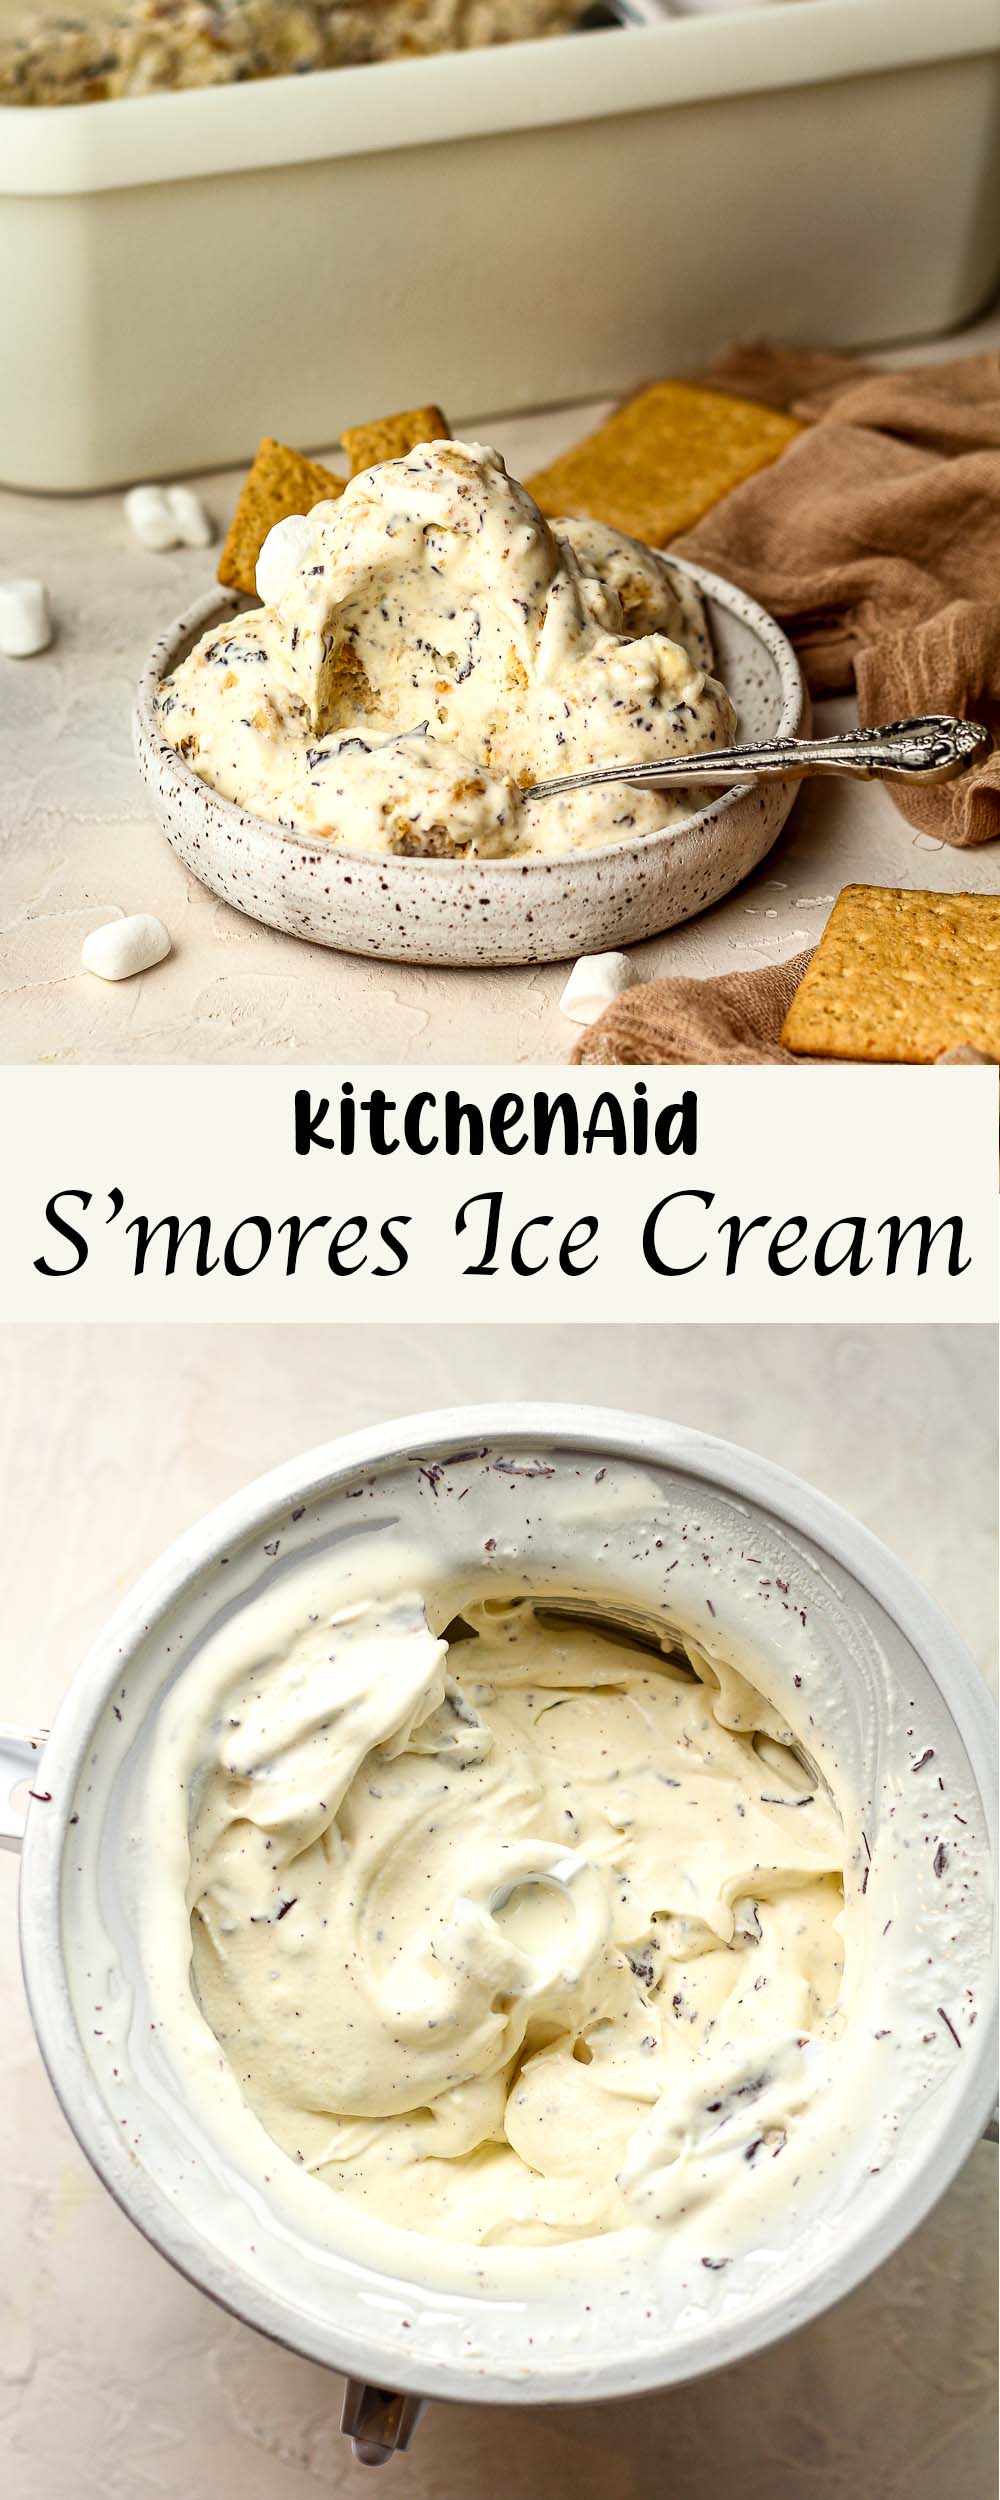 A collage of Kitchenaid s'mores ice cream.